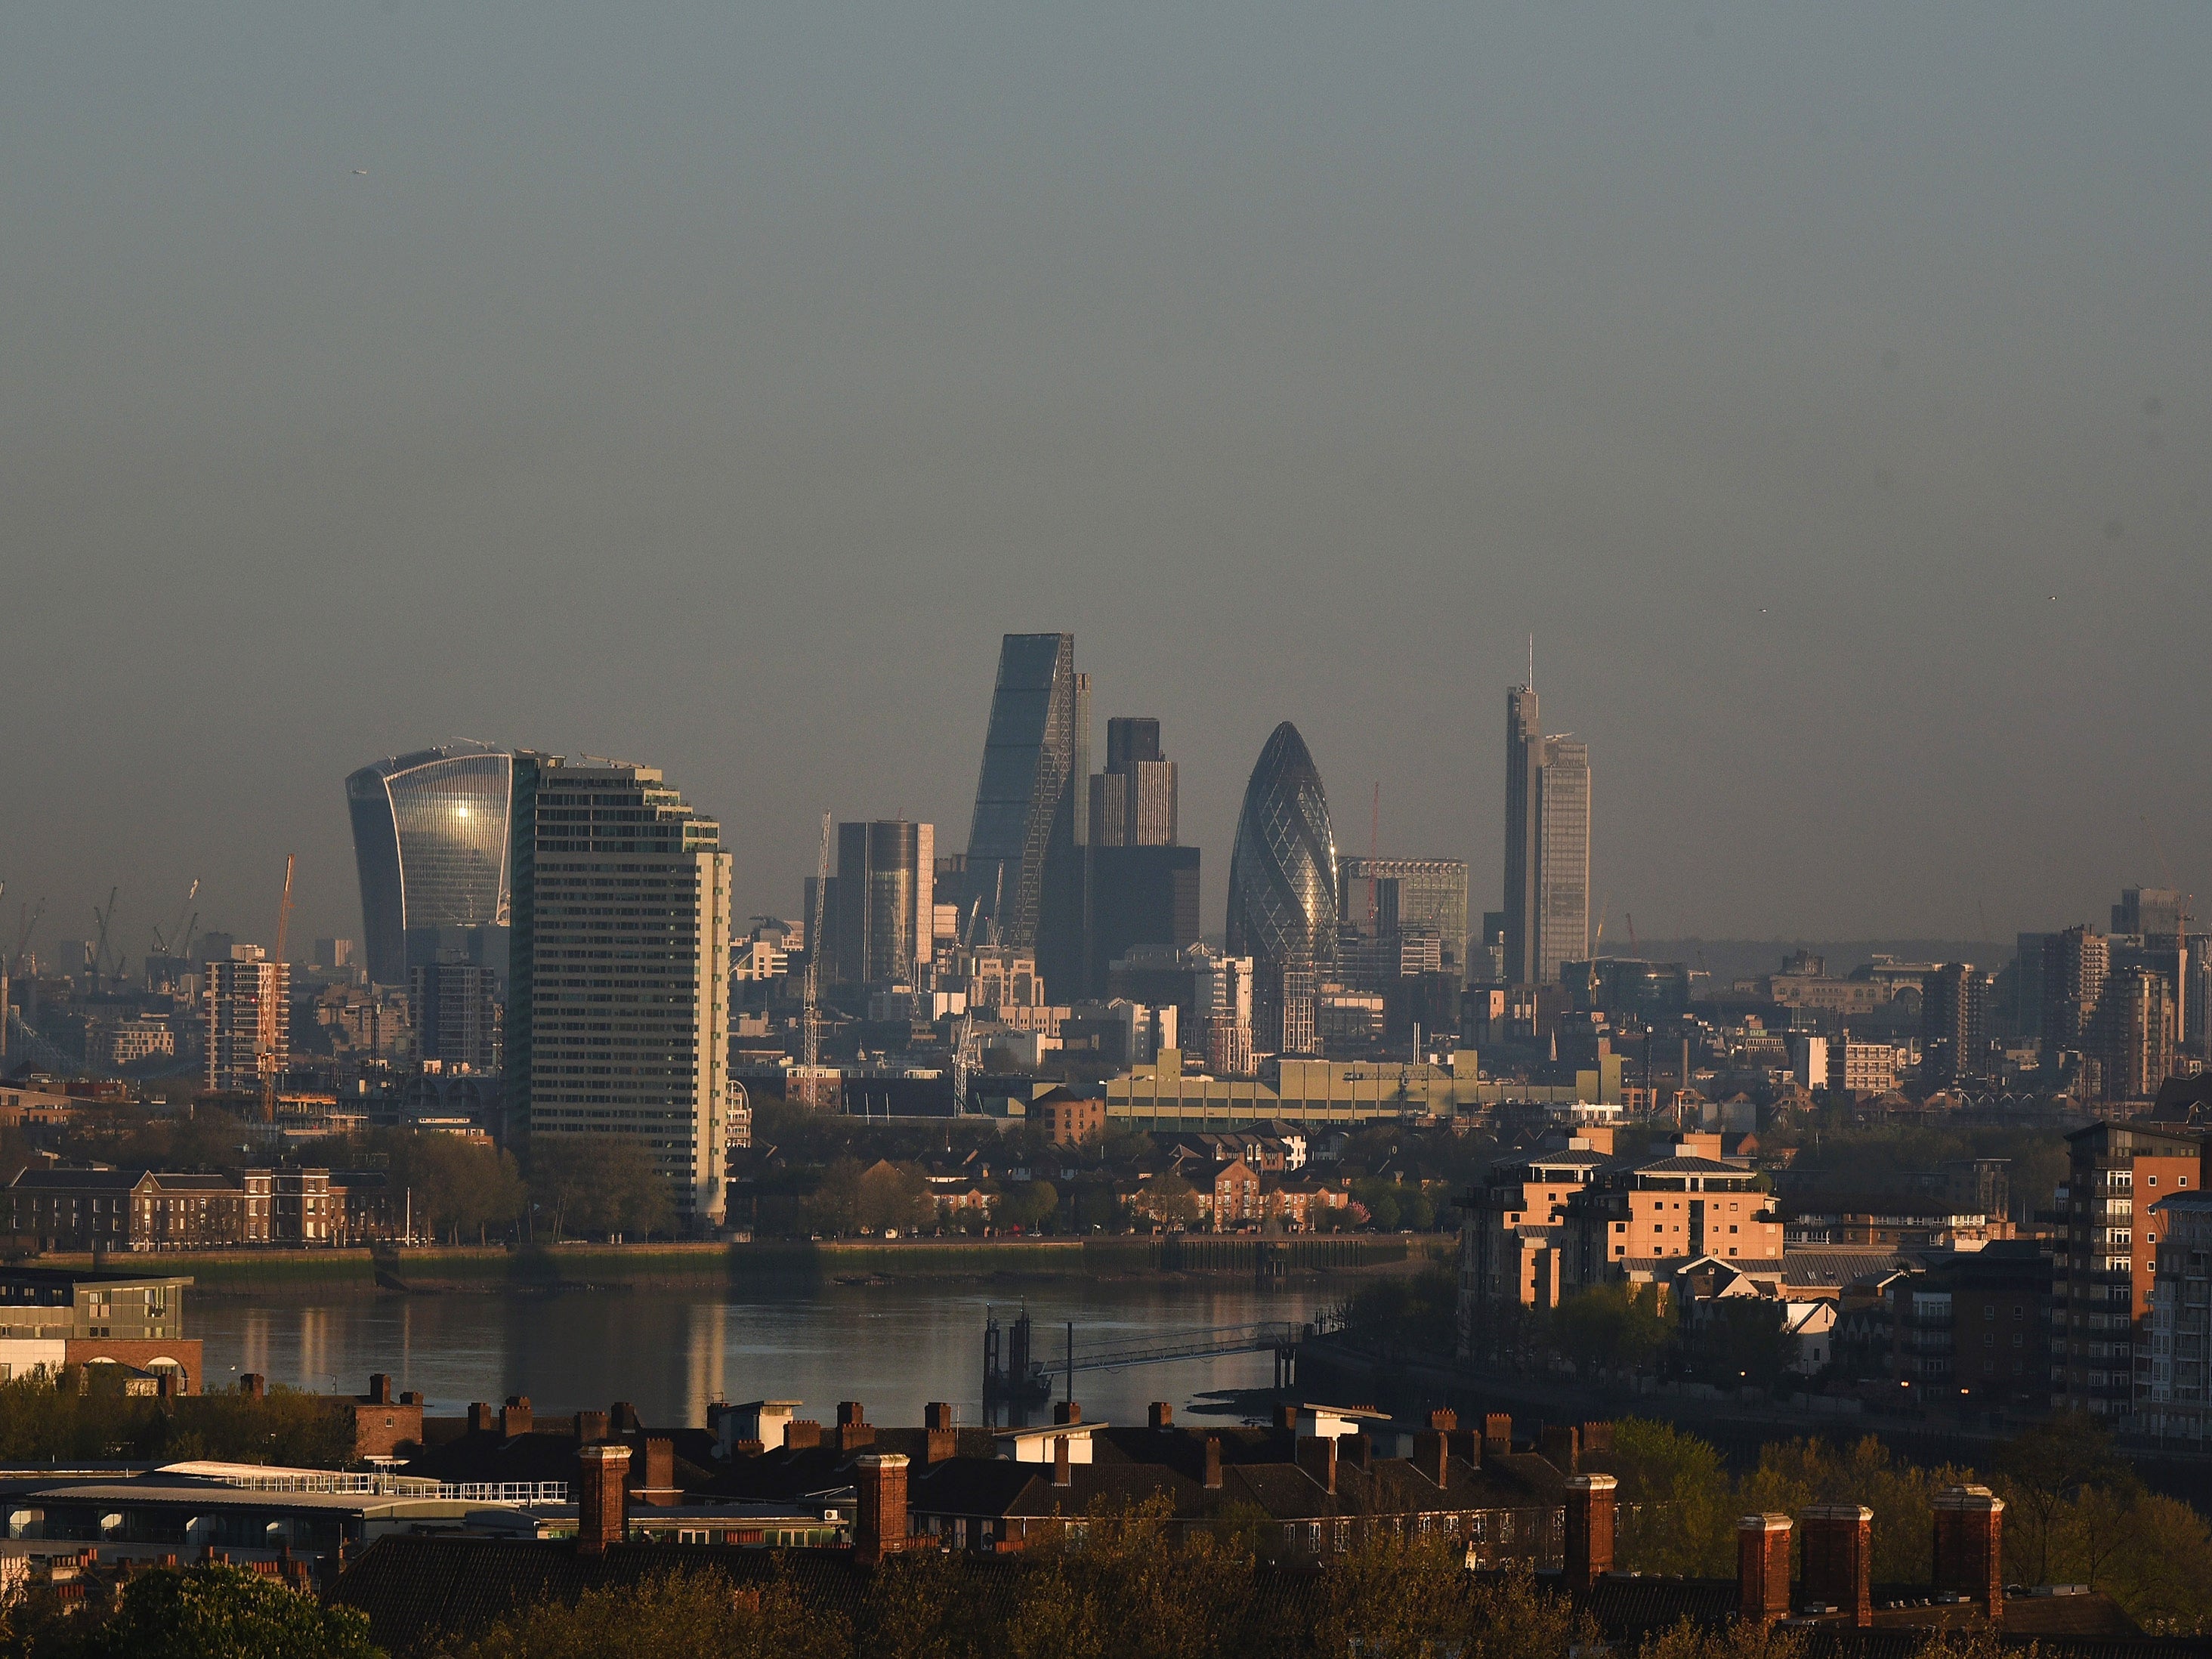 High levels of air pollution are forecast for the capital